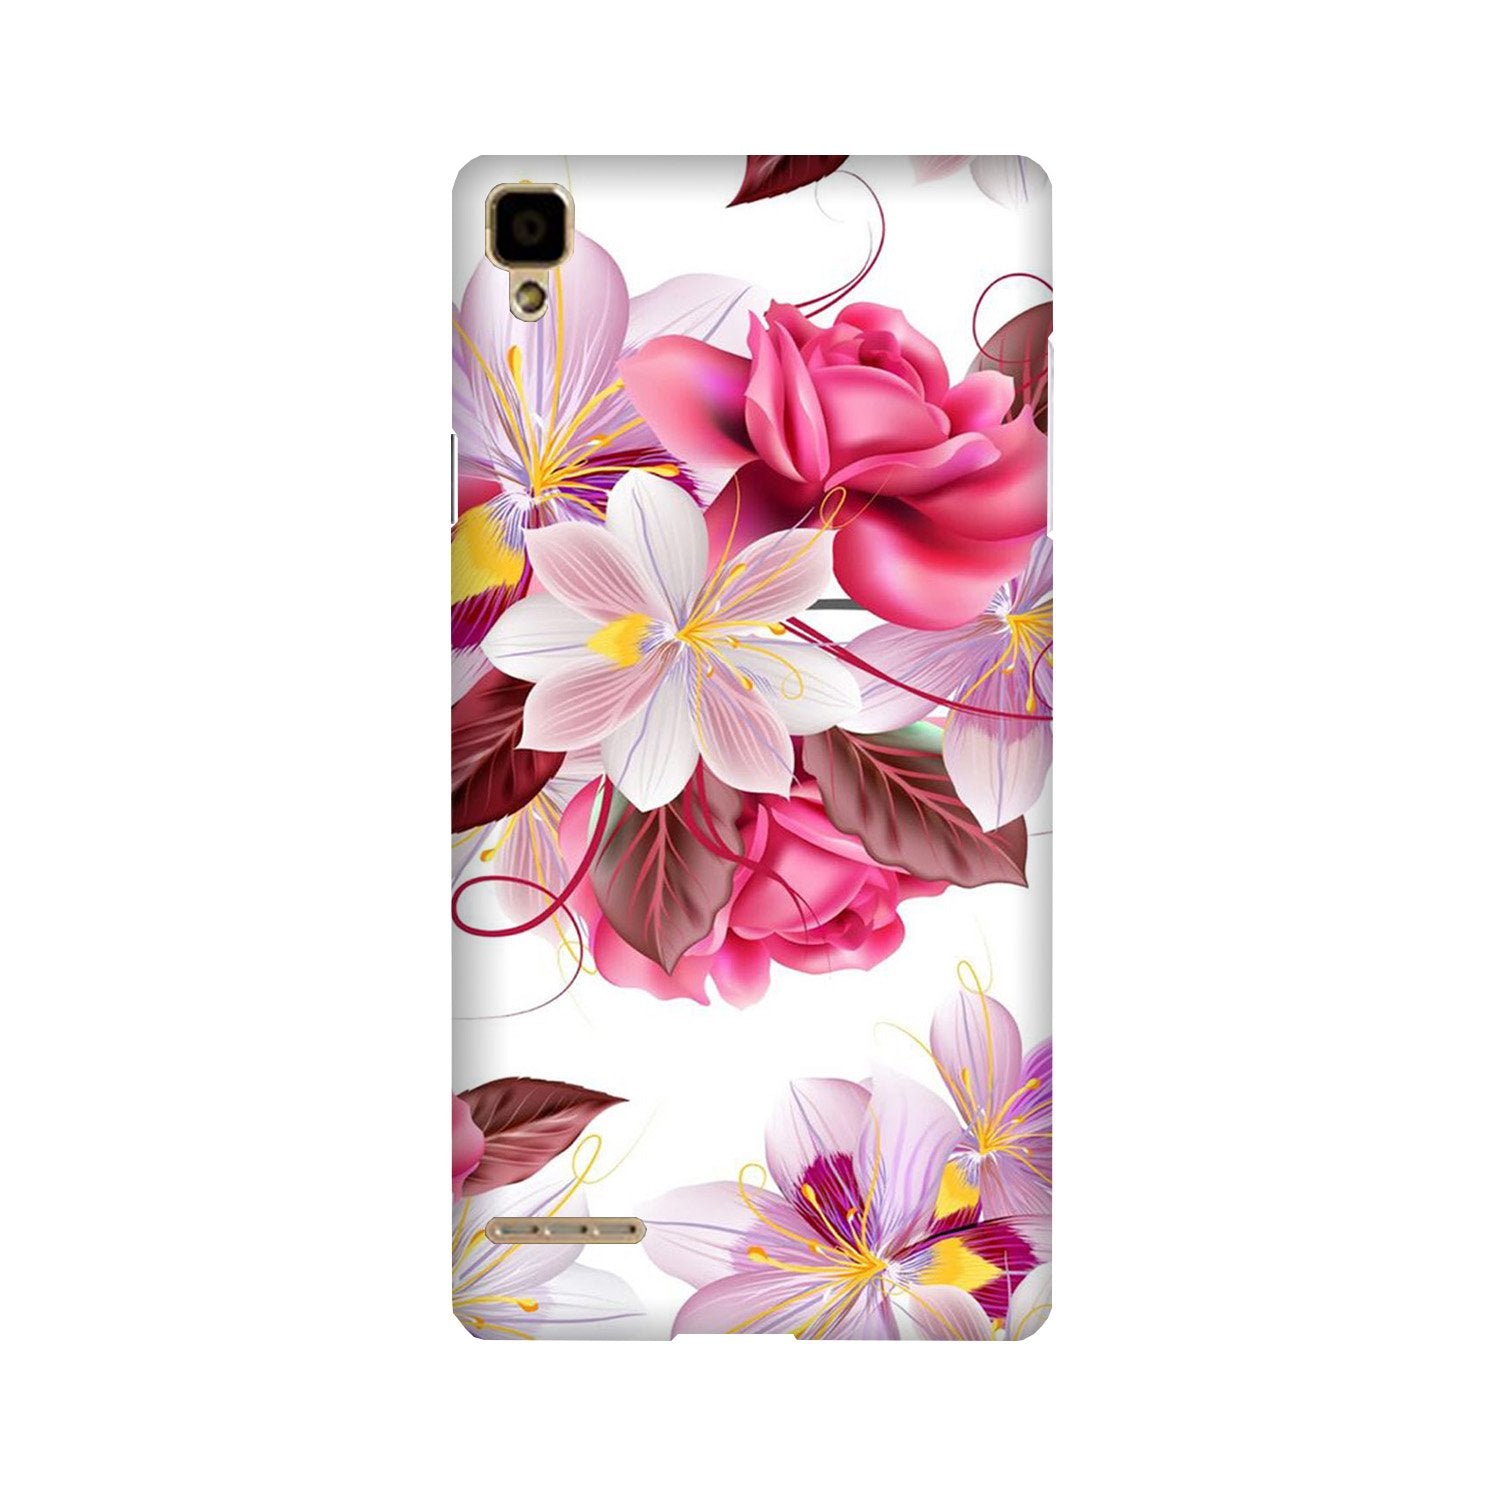 Beautiful flowers Case for Oppo F1